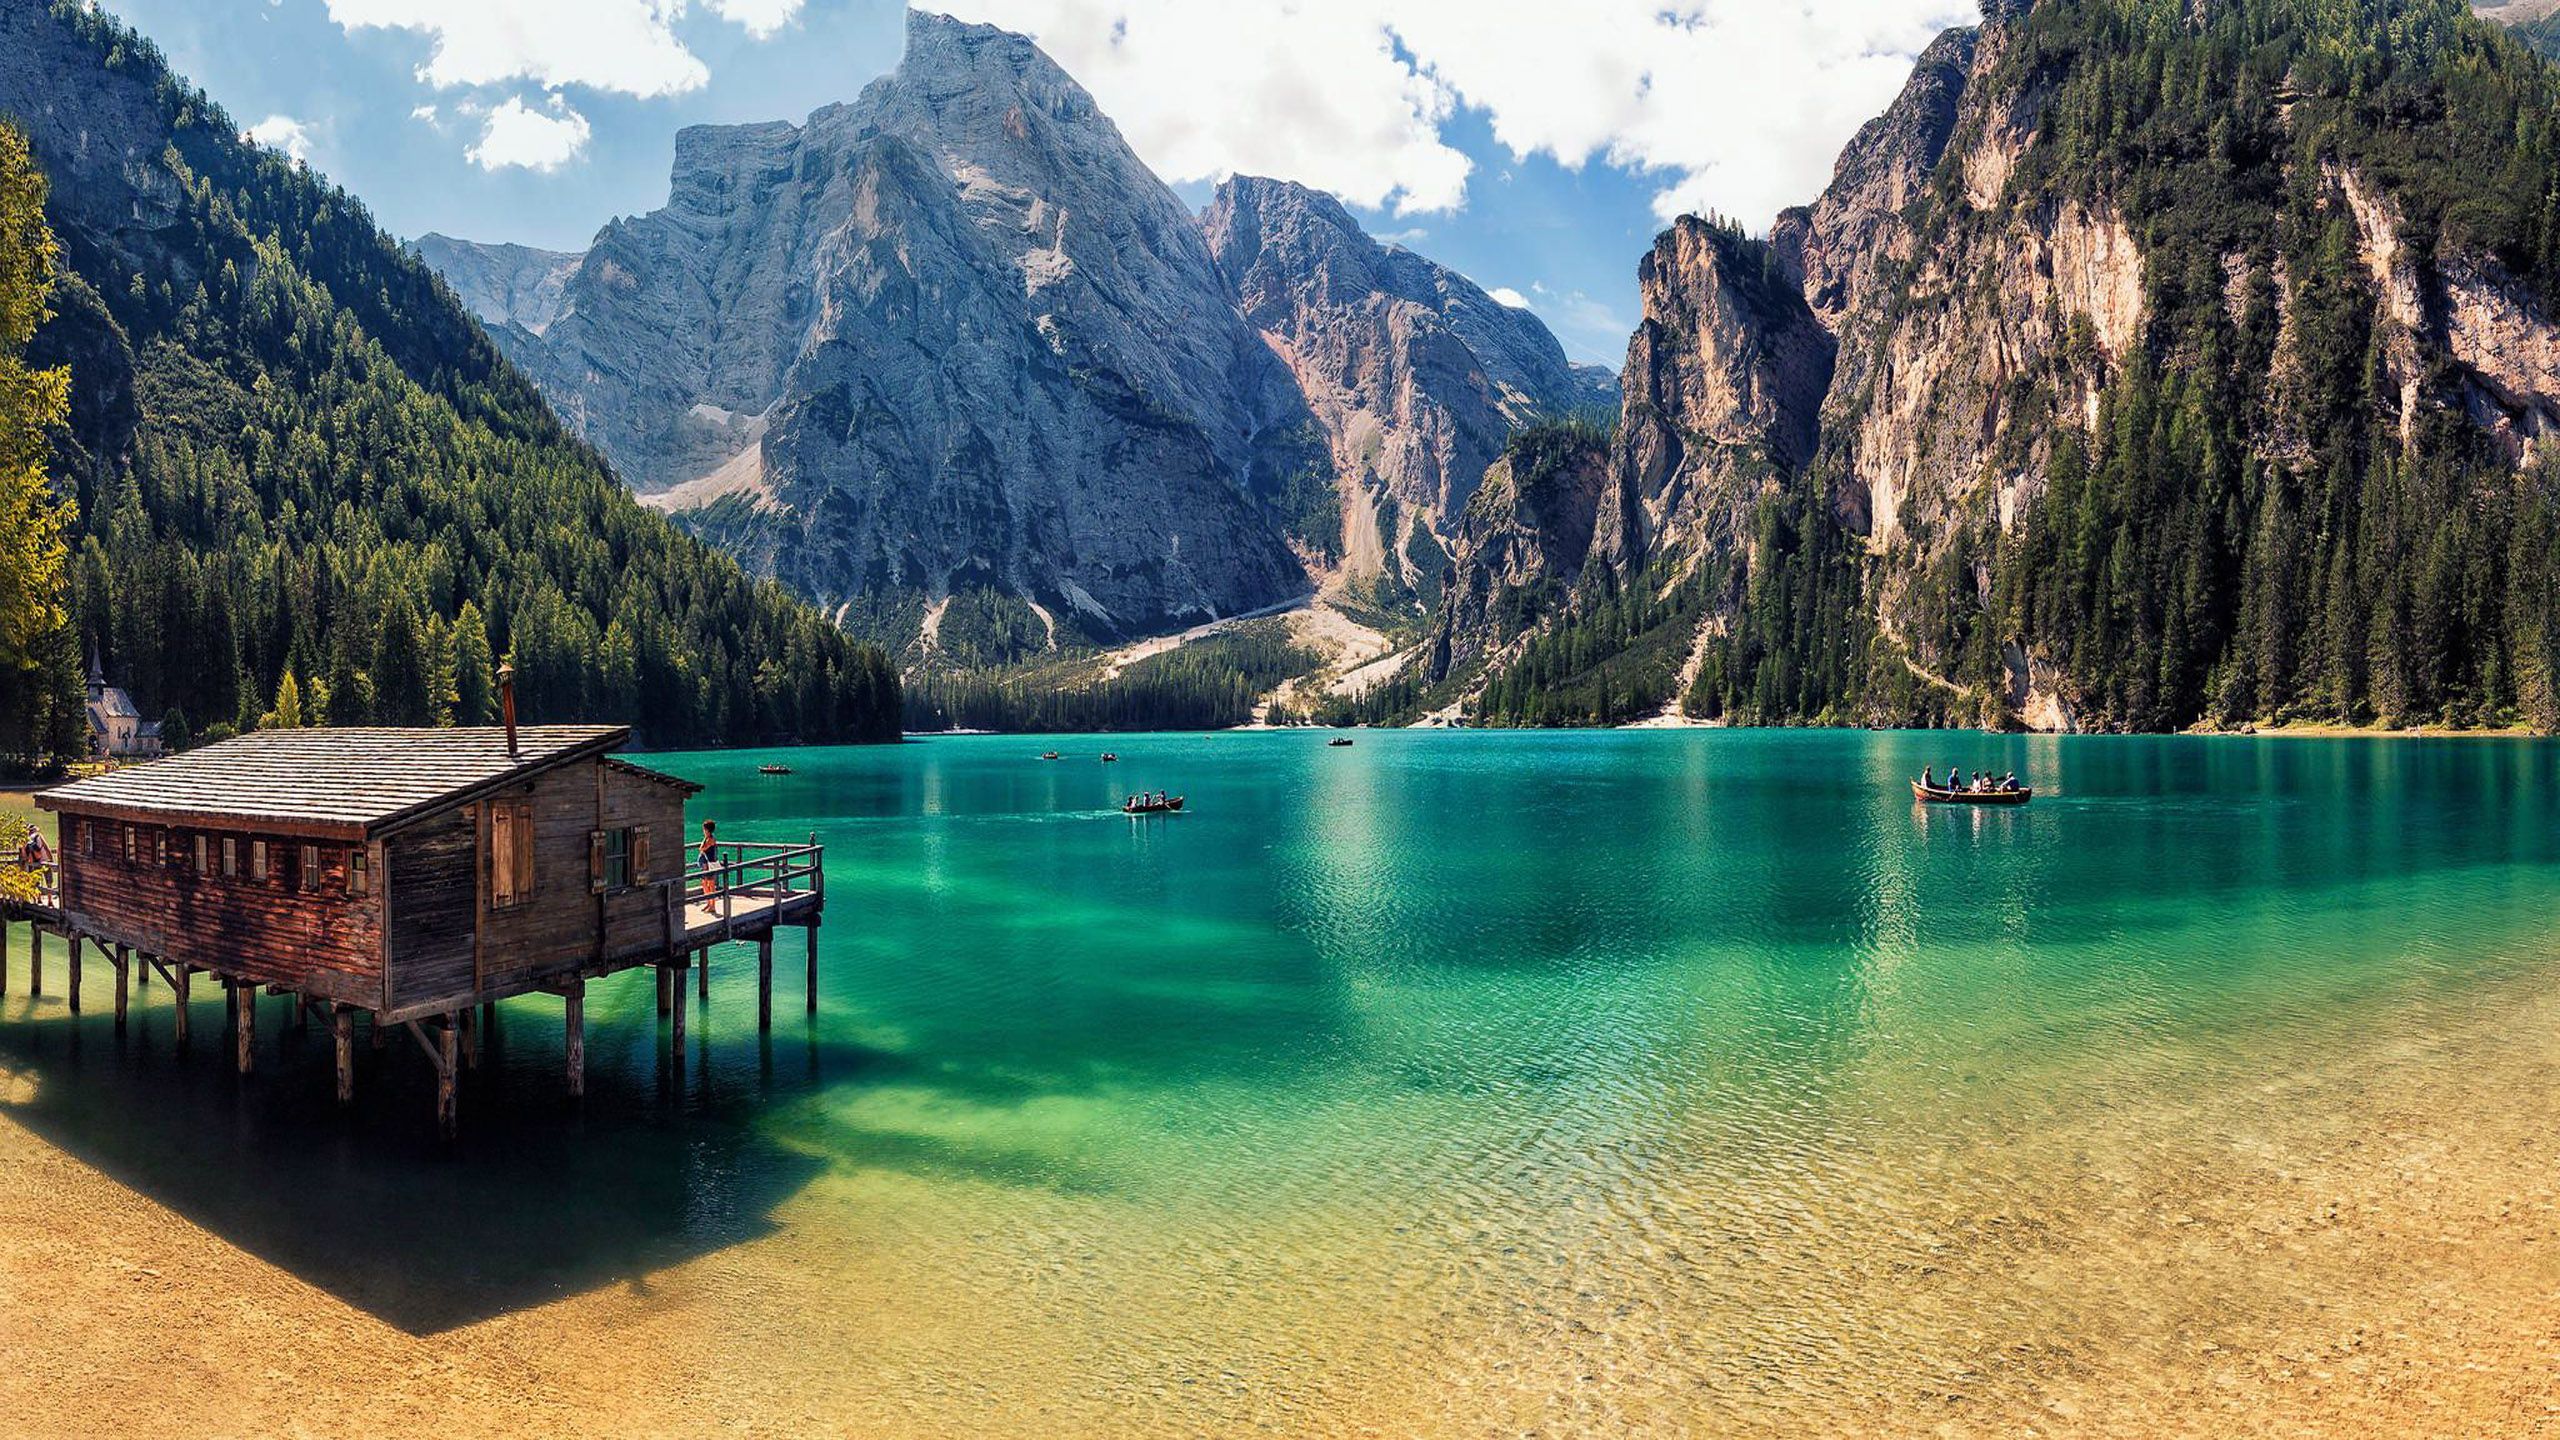 Pragser Wildsee Italy Blue Mountain Lake Clear Water Wooden House On Pillars Rocky Mountains Pine Forest Boating With Boat Summer Wallpaper HD 2560x1440, Wallpaper13.com